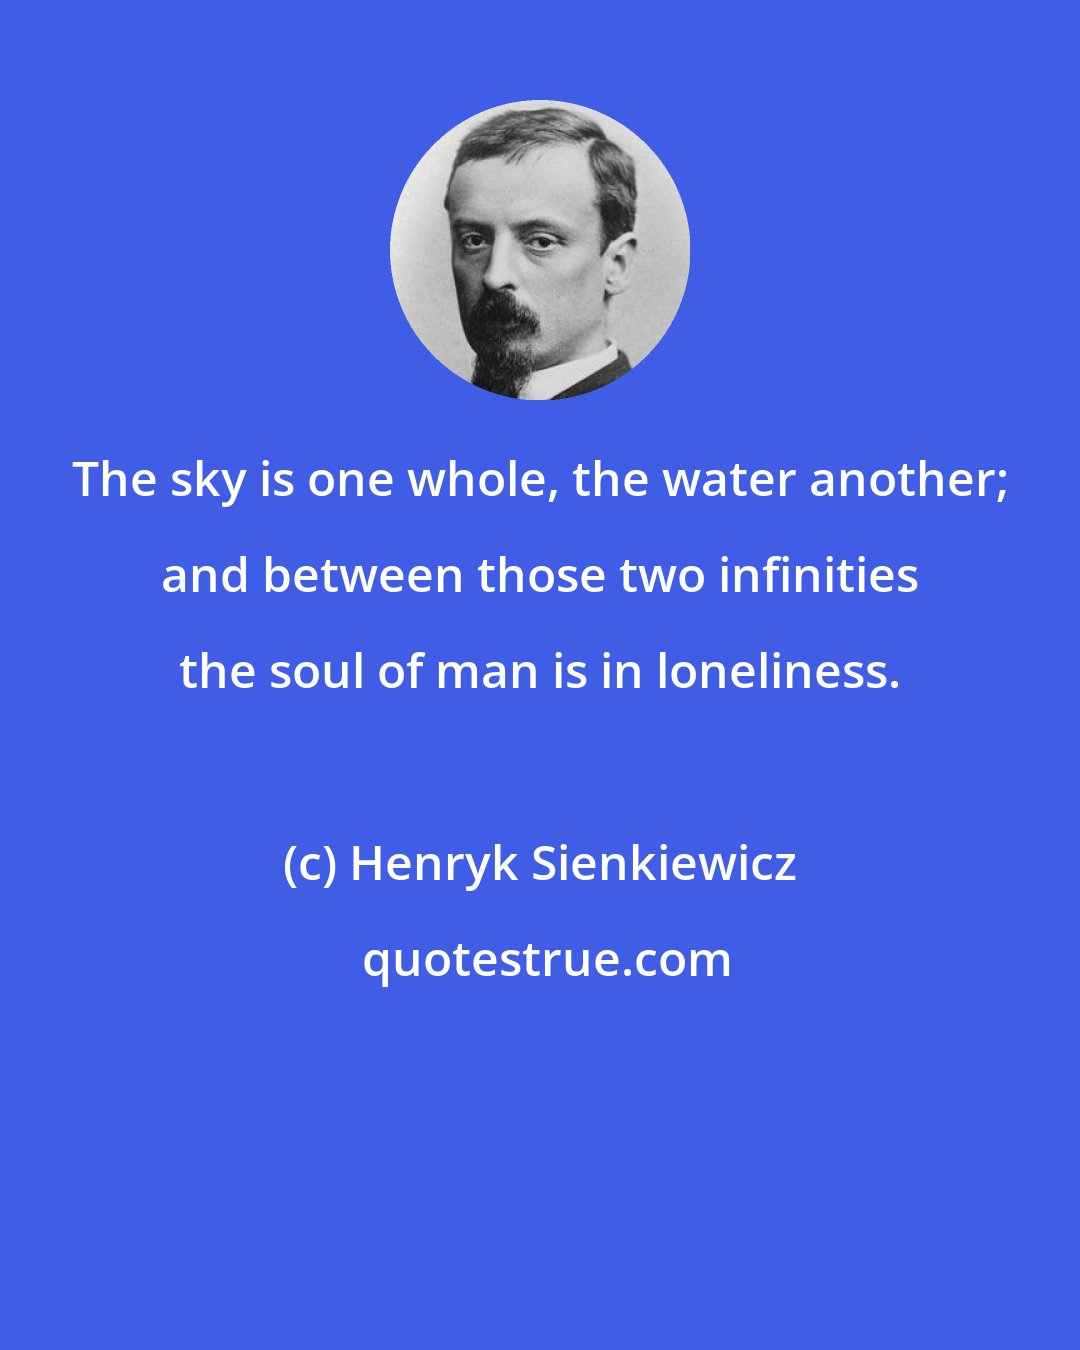 Henryk Sienkiewicz: The sky is one whole, the water another; and between those two infinities the soul of man is in loneliness.